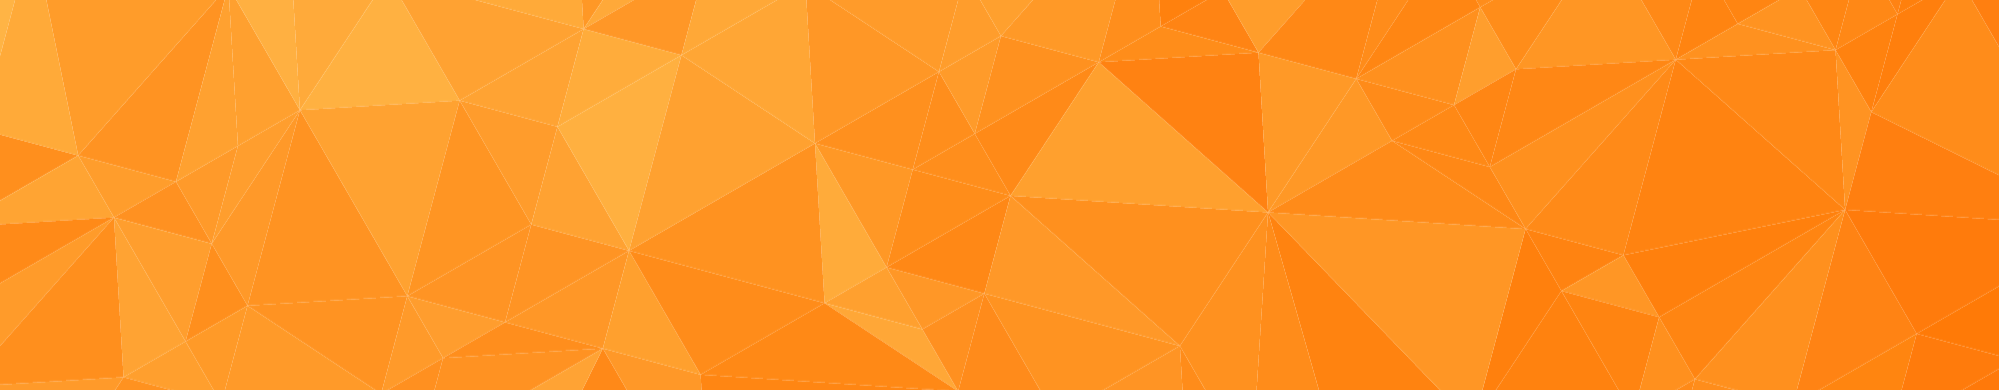 a horizontal bar of abstract geometric shapes in various shades of orange.